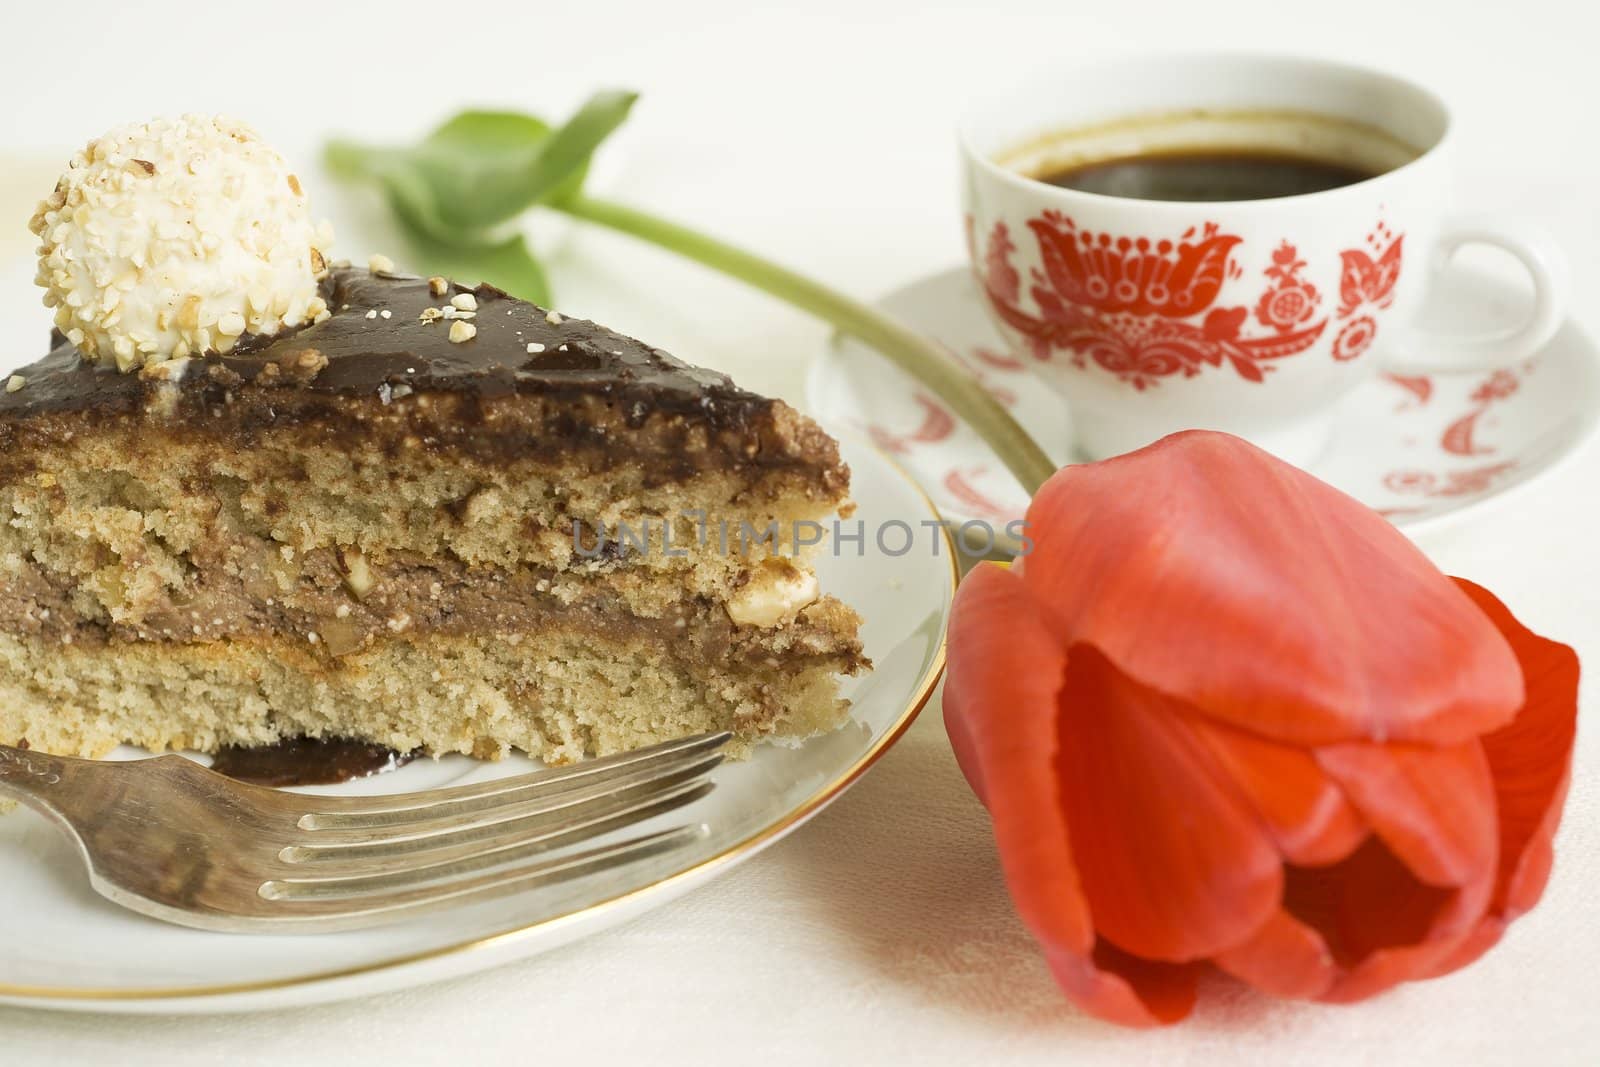 Piece of chocolate cake with coffee cup and red tulip on the table